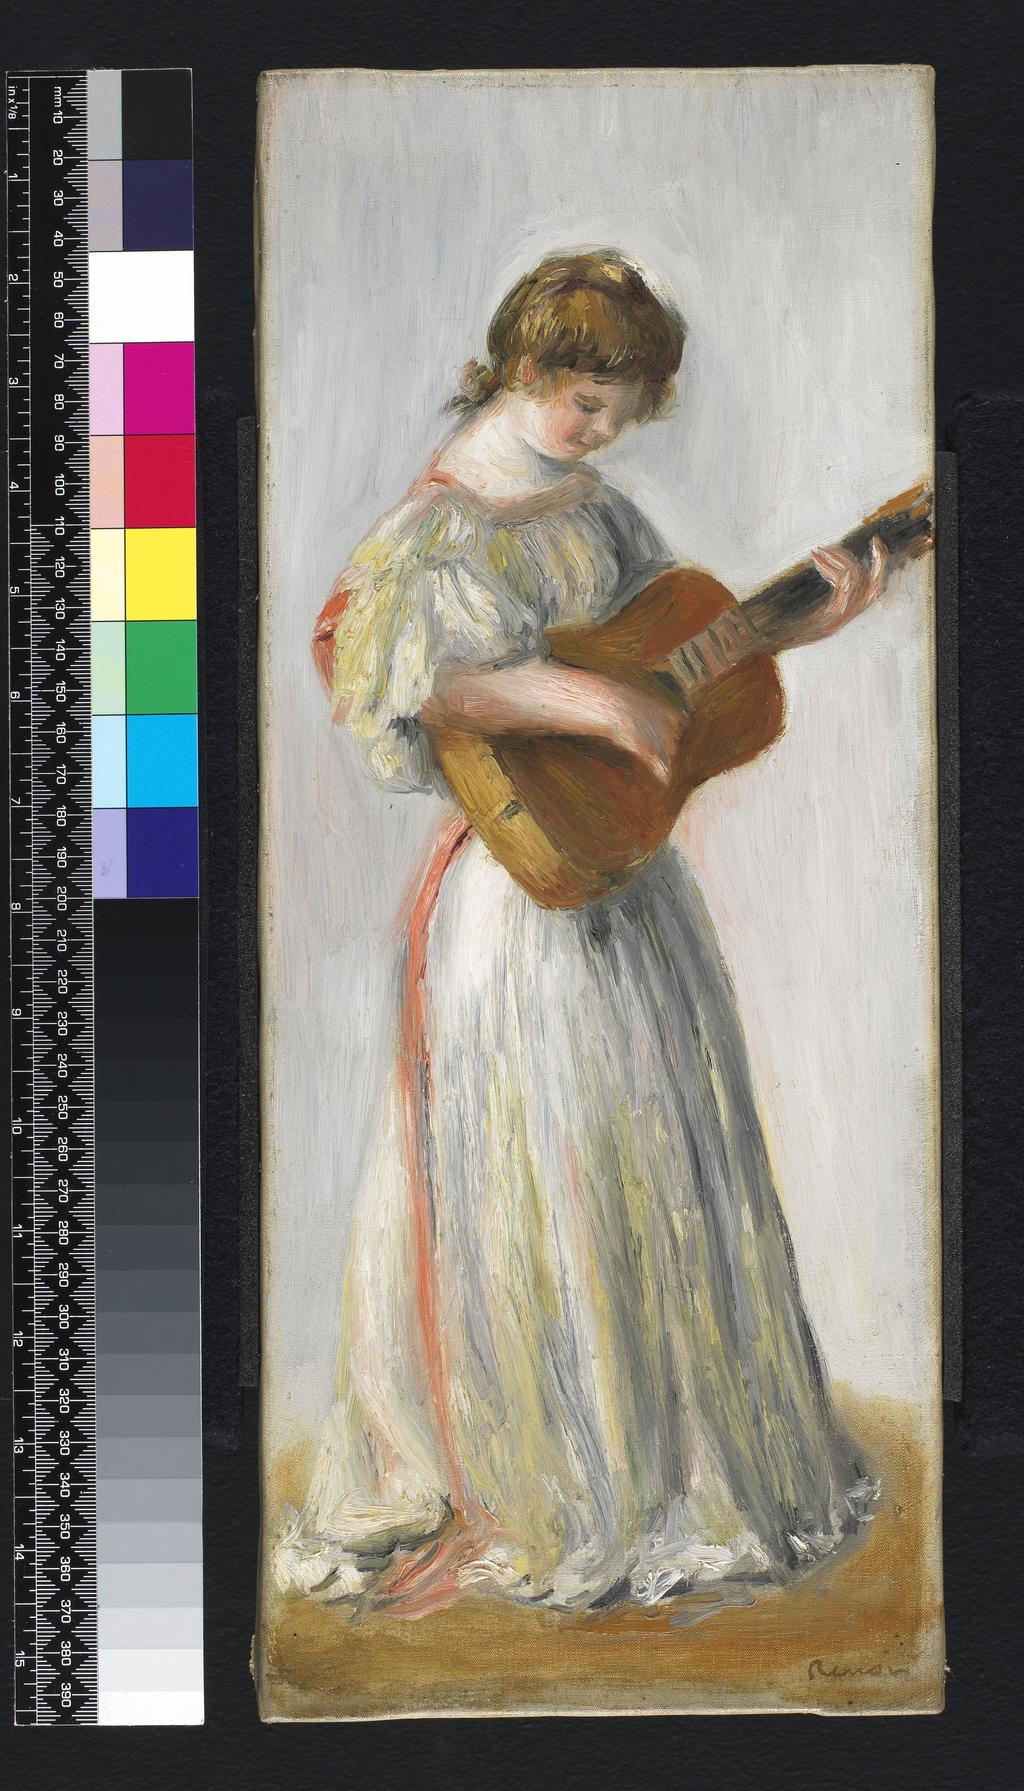 An image of La musique. Translated title: Music. Renoir, Pierre Auguste (French, 1841-1919). Oil on canvas, height 40.0 cm, width 16.5 cm, 1895.